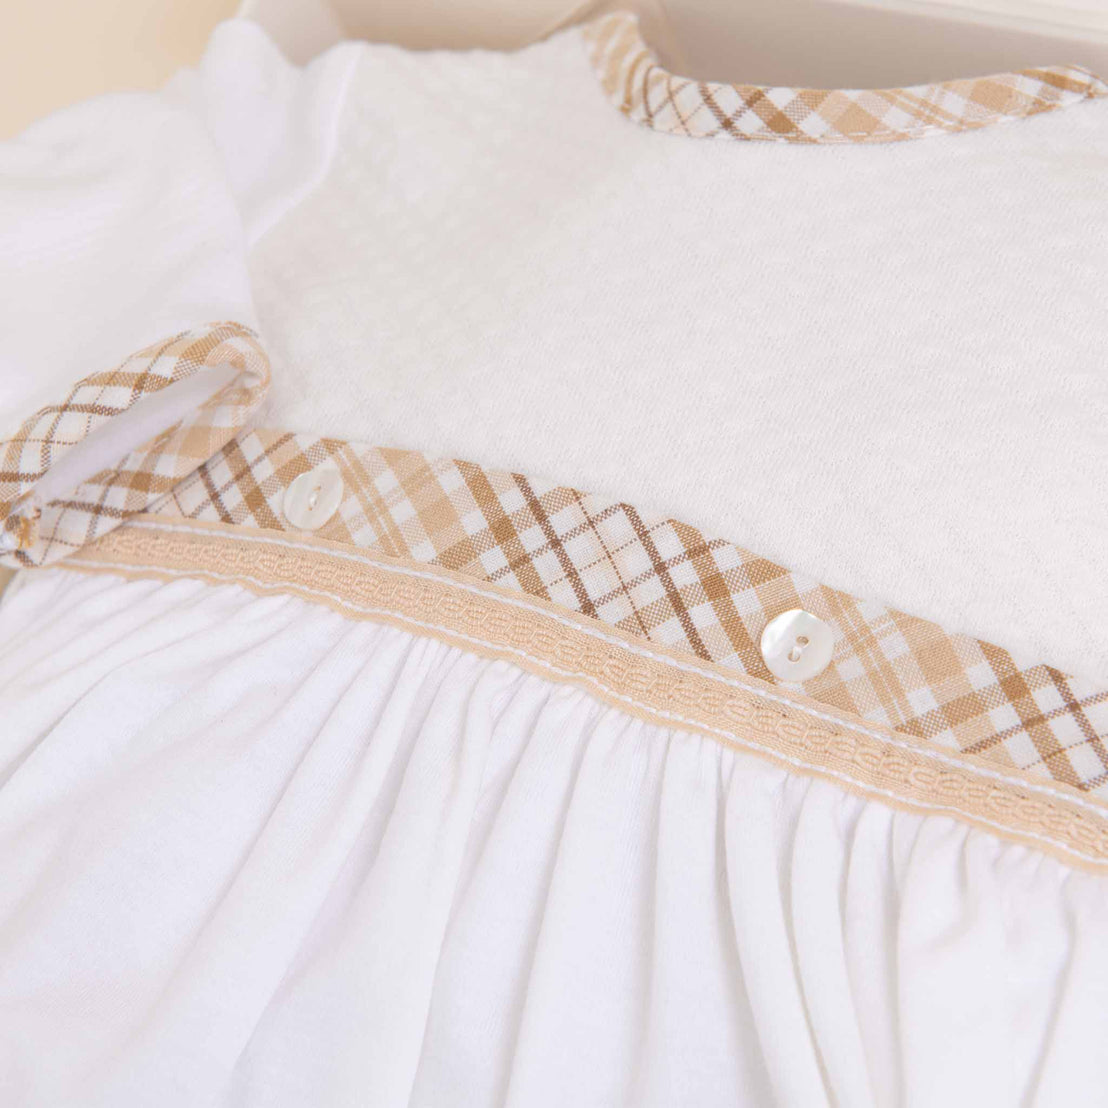 Close-up of a Dylan Newborn Gift Set with checkered beige trim and small buttons, featuring delicate lace detailing.